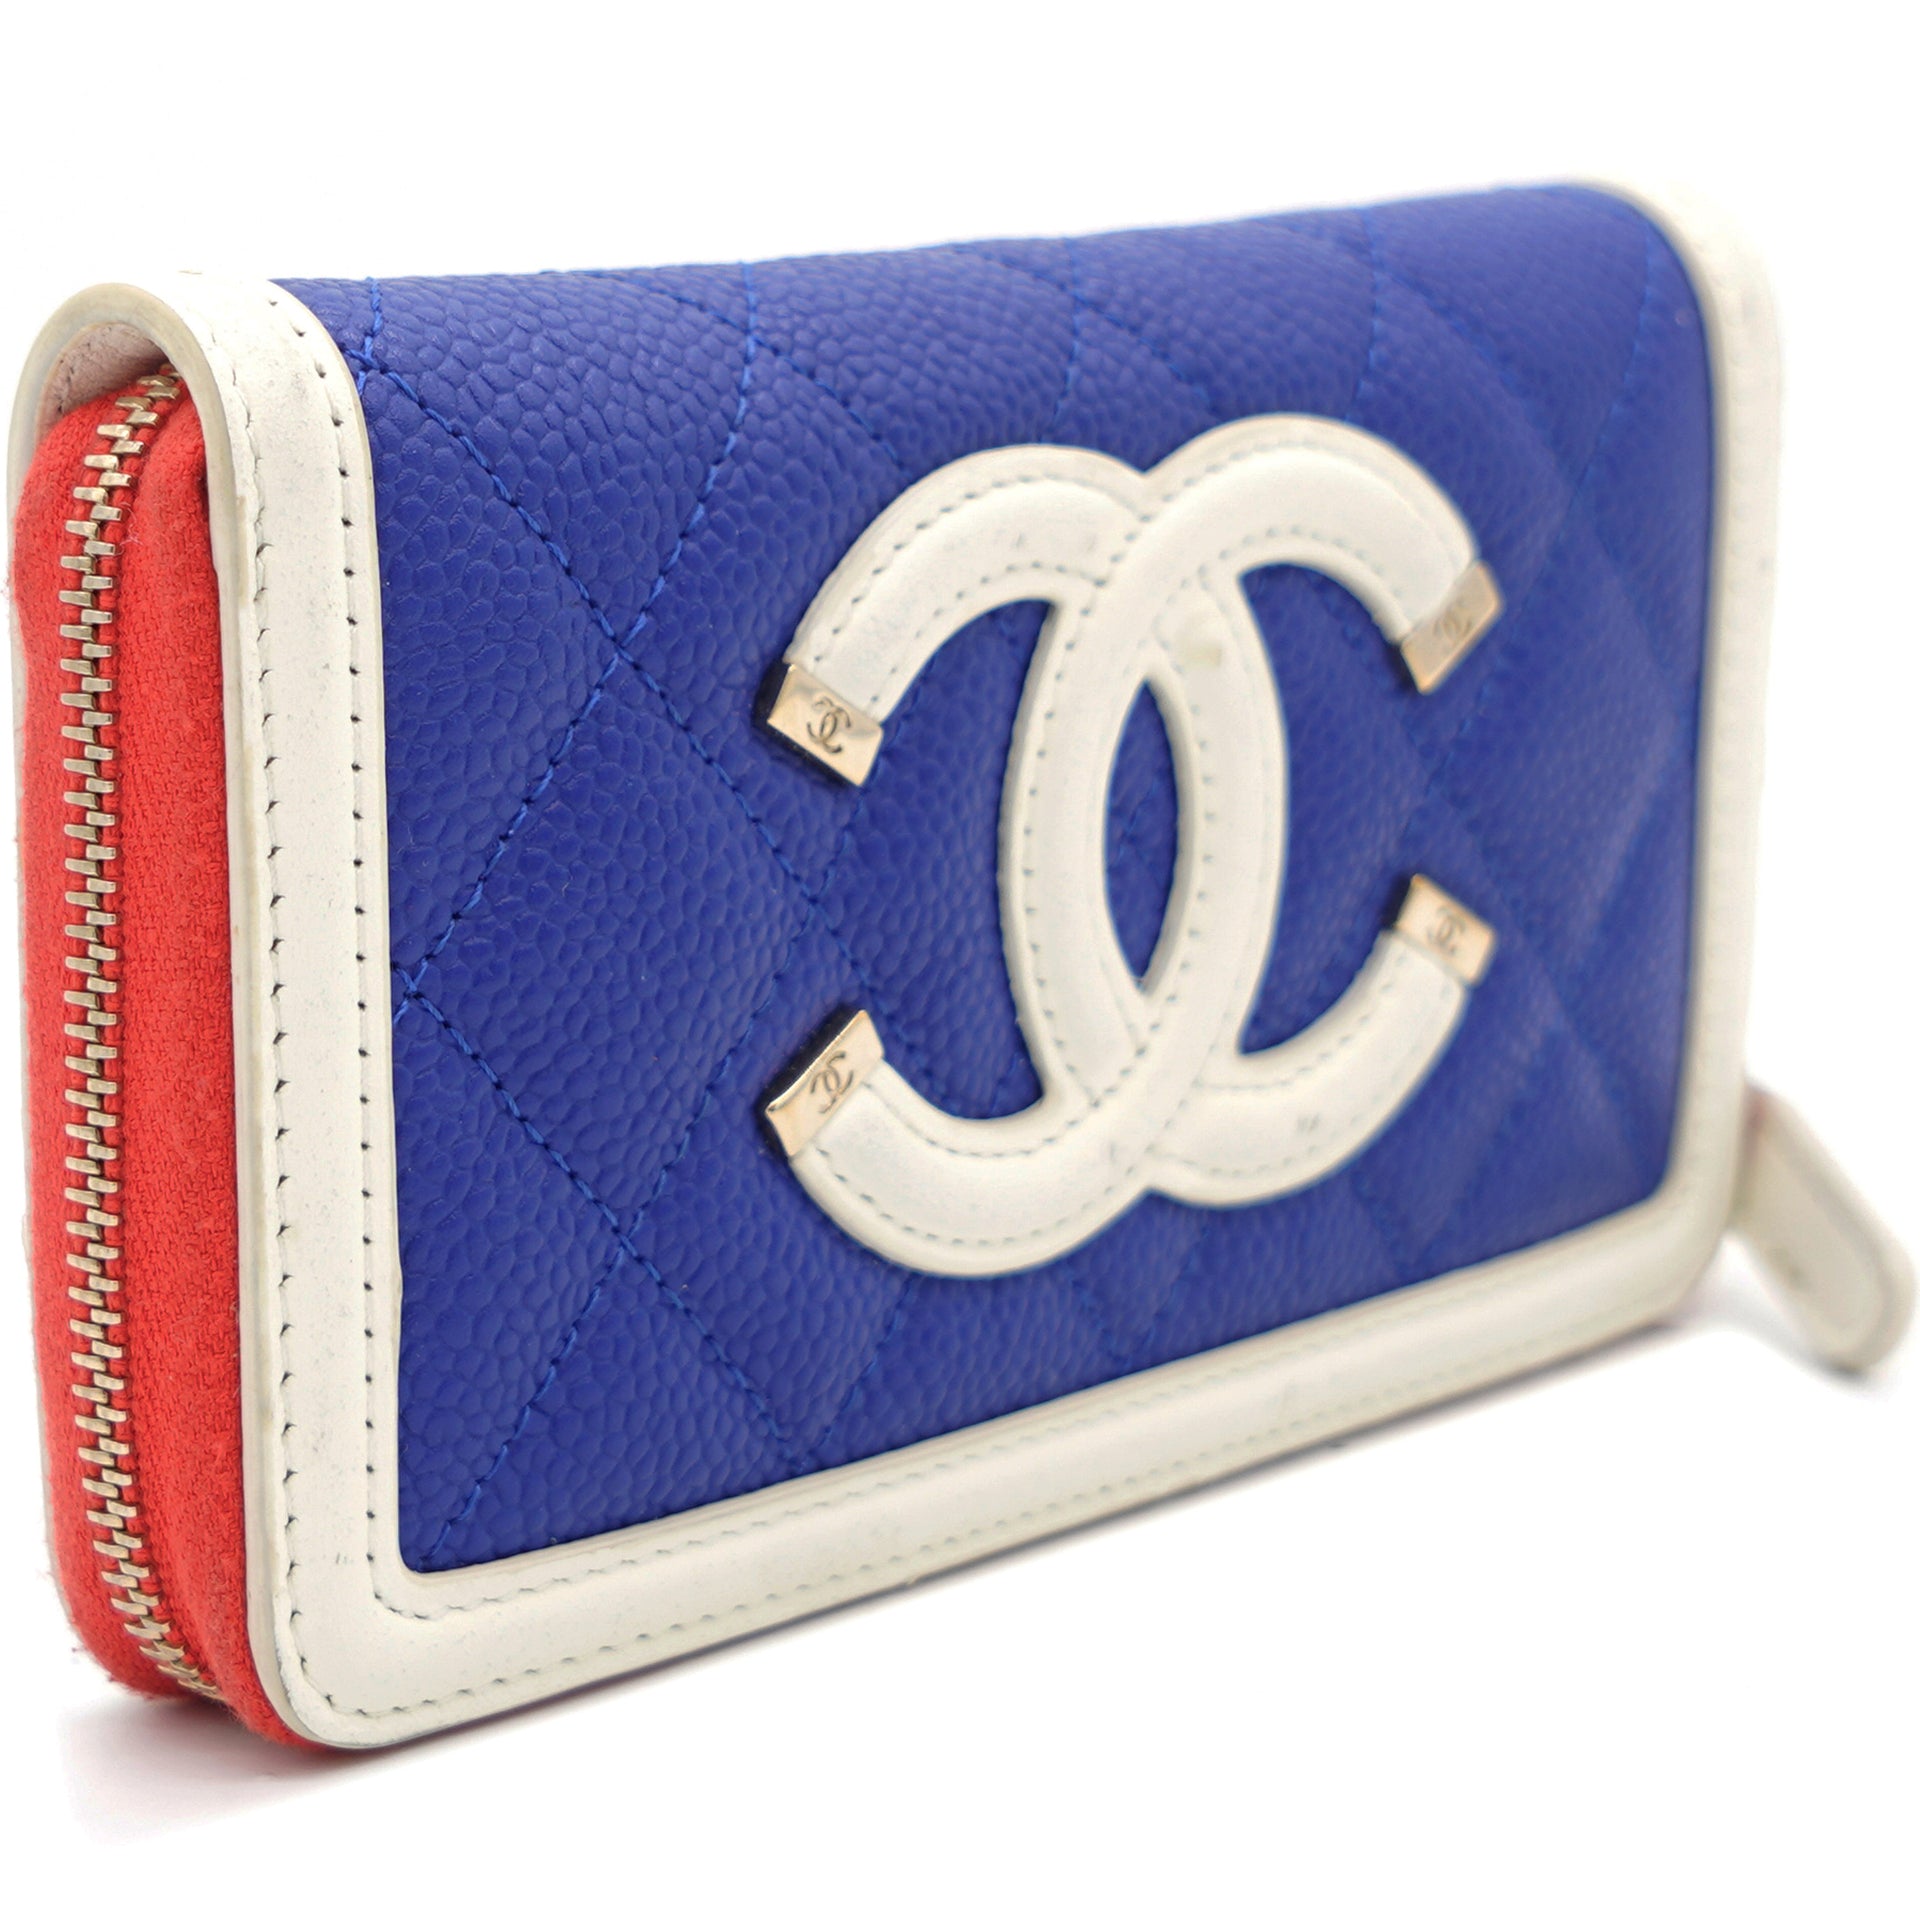 Chanel Small Zip Pouch Purse in Metallic Blue Caviar with Gold Hardware -  SOLD